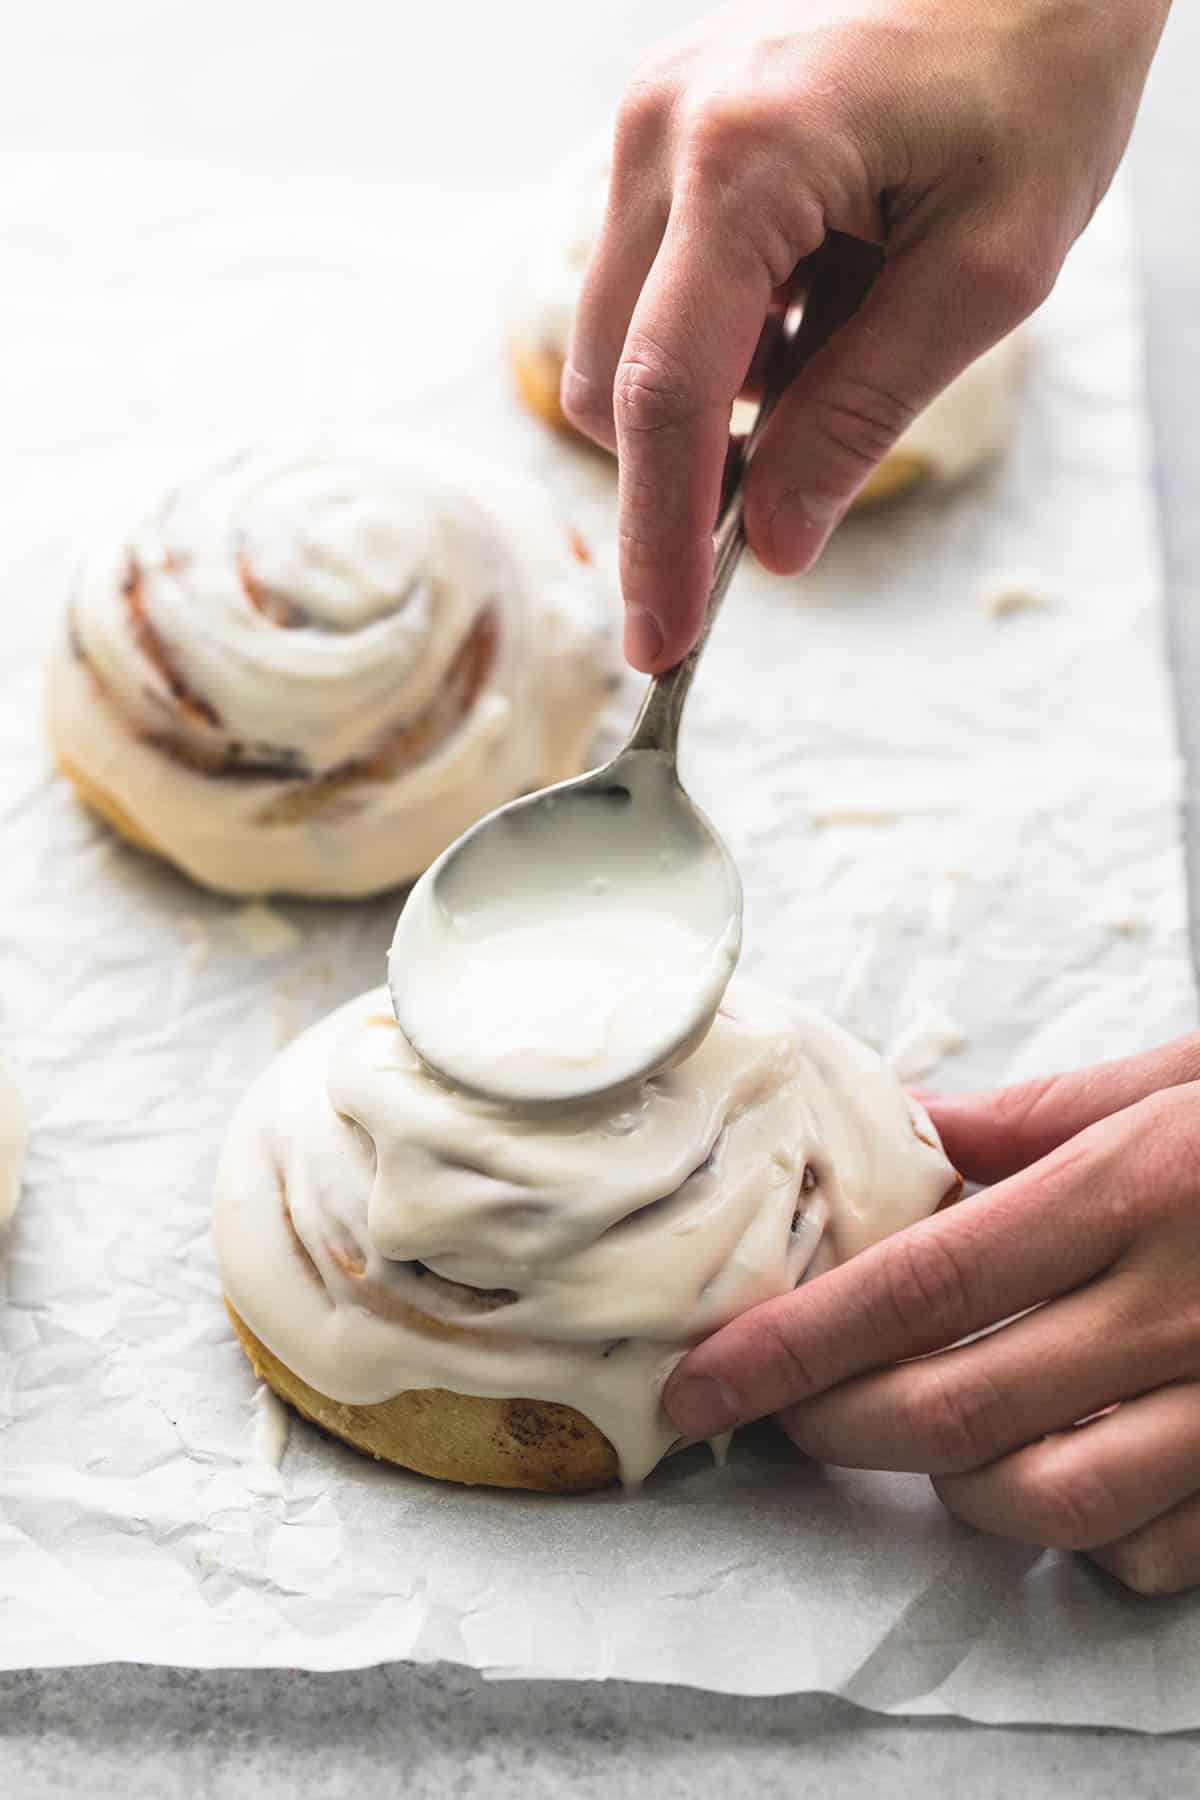 a hand icing a cinnamon roll with a spoon with more iced rolls in the background.